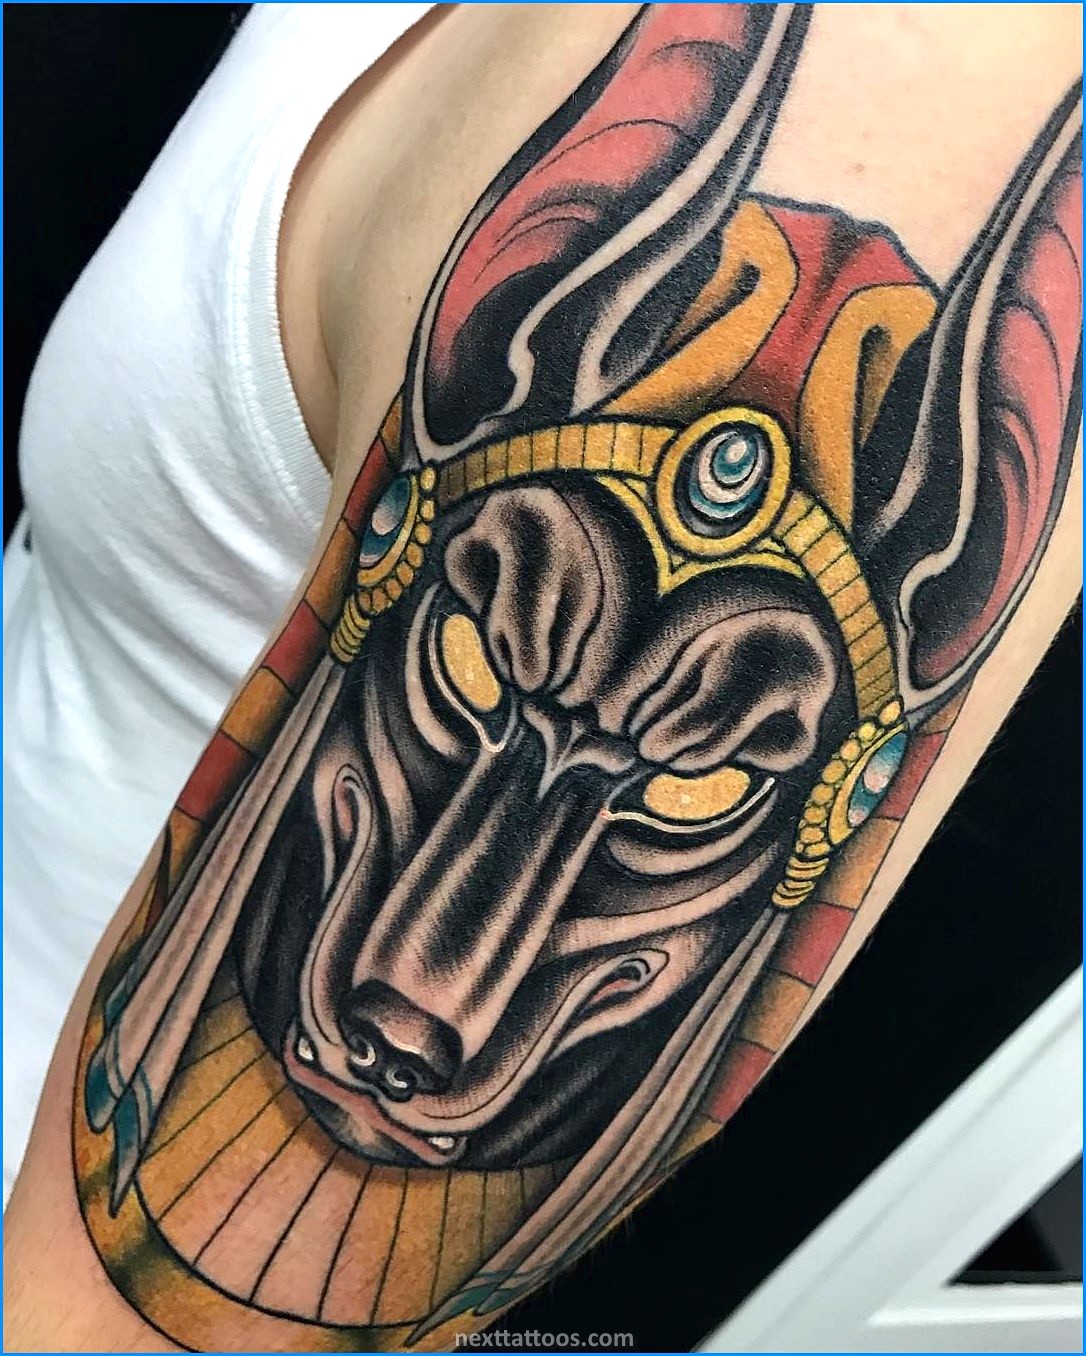 Get an Egyptian Animal Tattoo to Show Off Your Personality and Spirituality